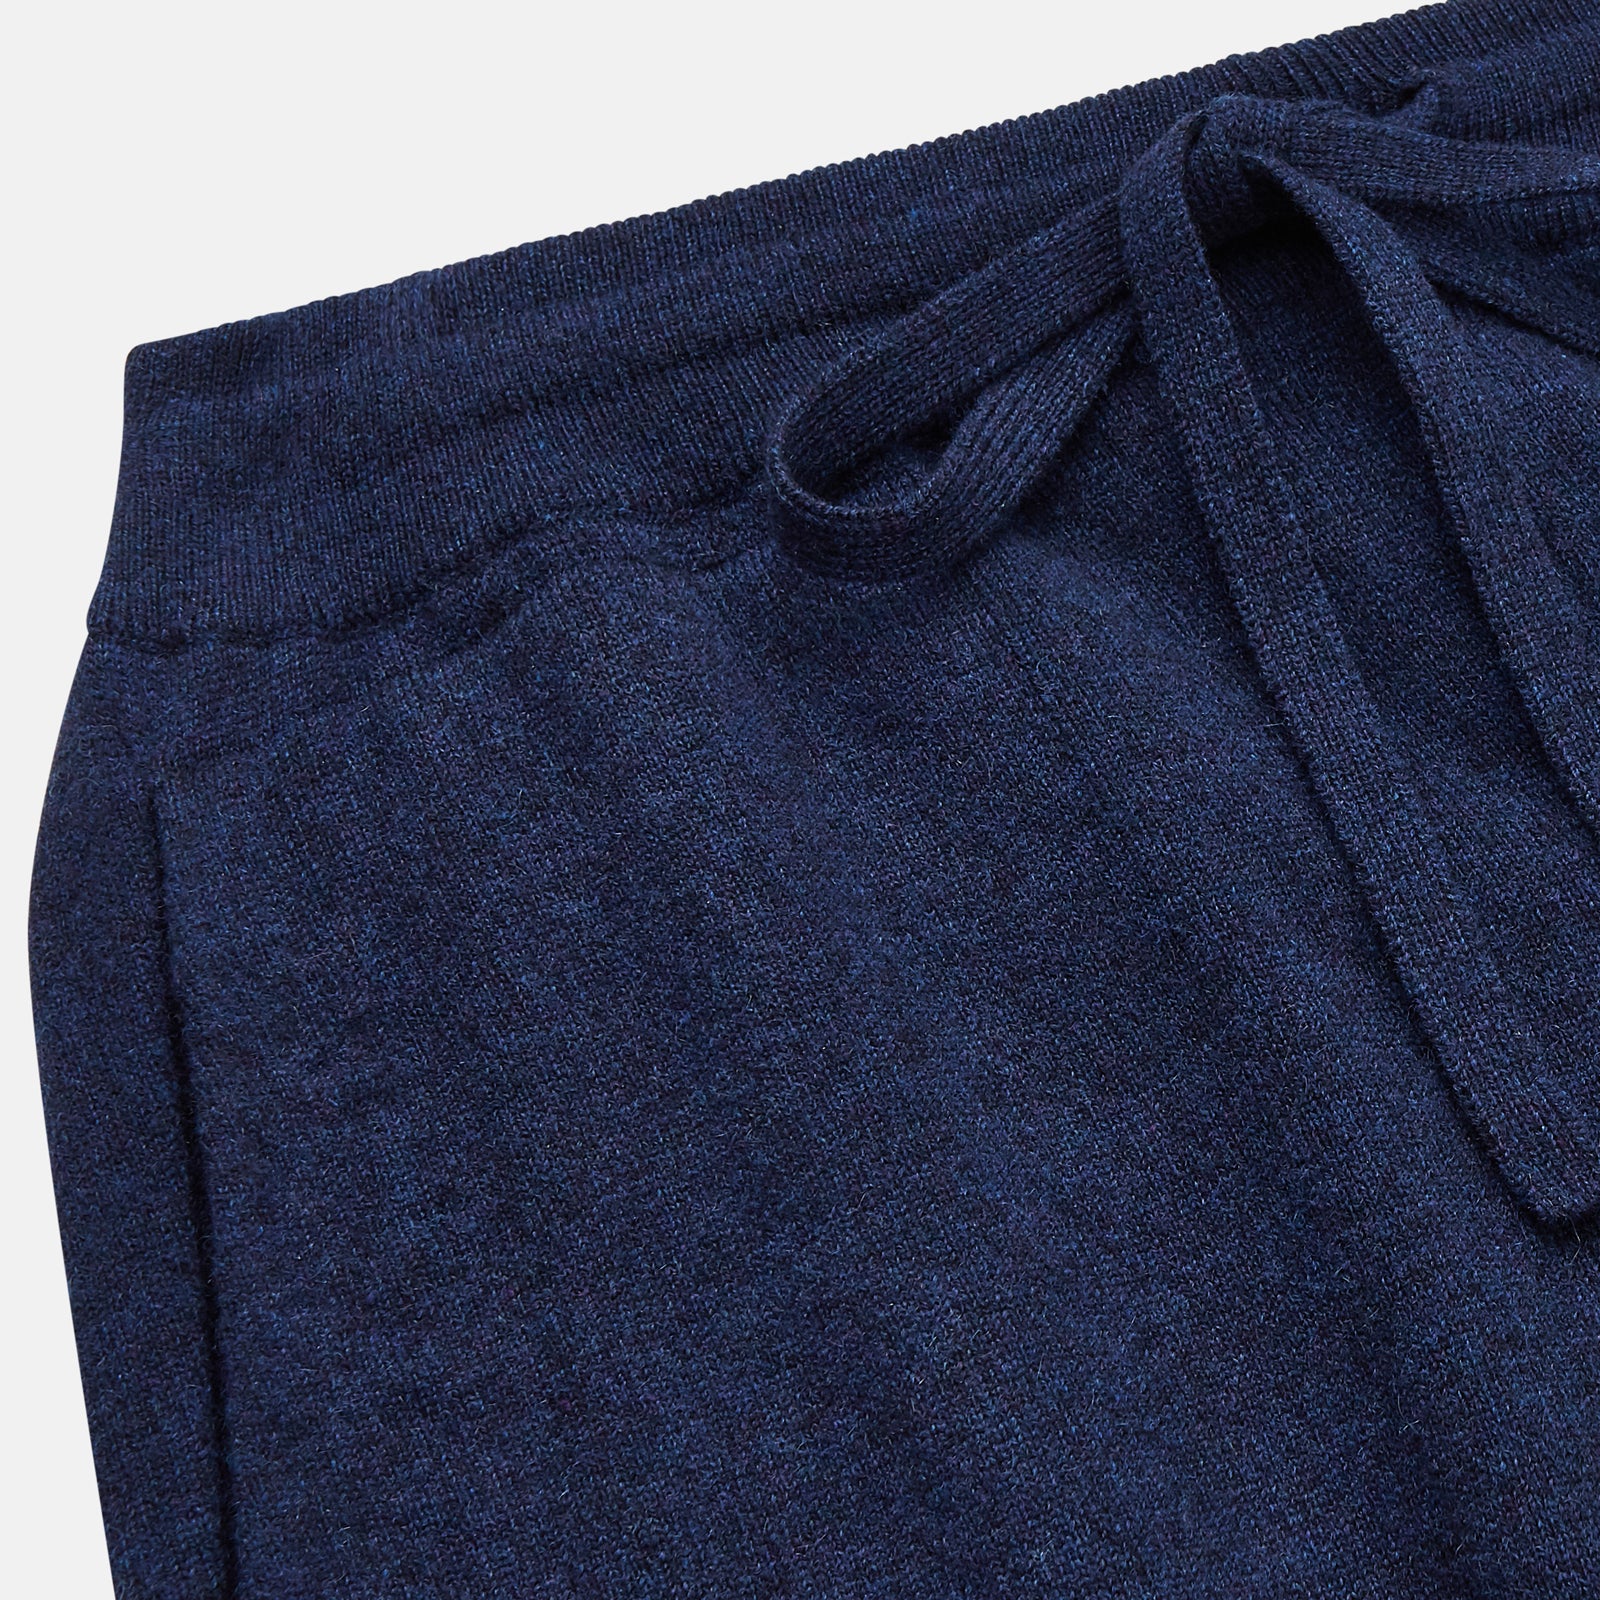 Navy Cashmere Knitted Lounge Pyjama Trousers